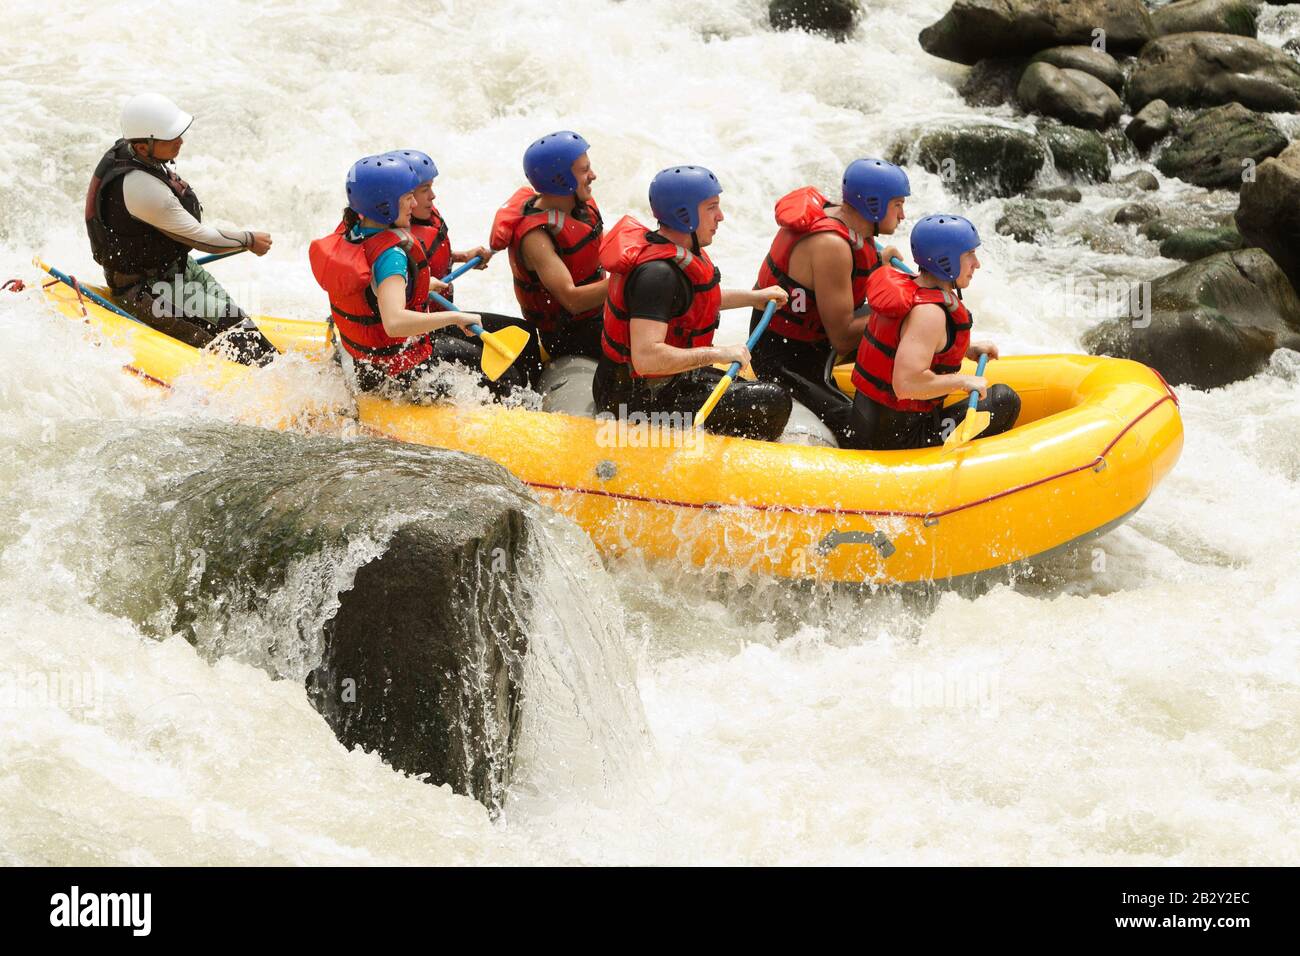 Partnership Of Mixed Pilgrim Men And Femininity With Guided By Professional Pilot On Whitewater River Rafting In Ecuador Stock Photo